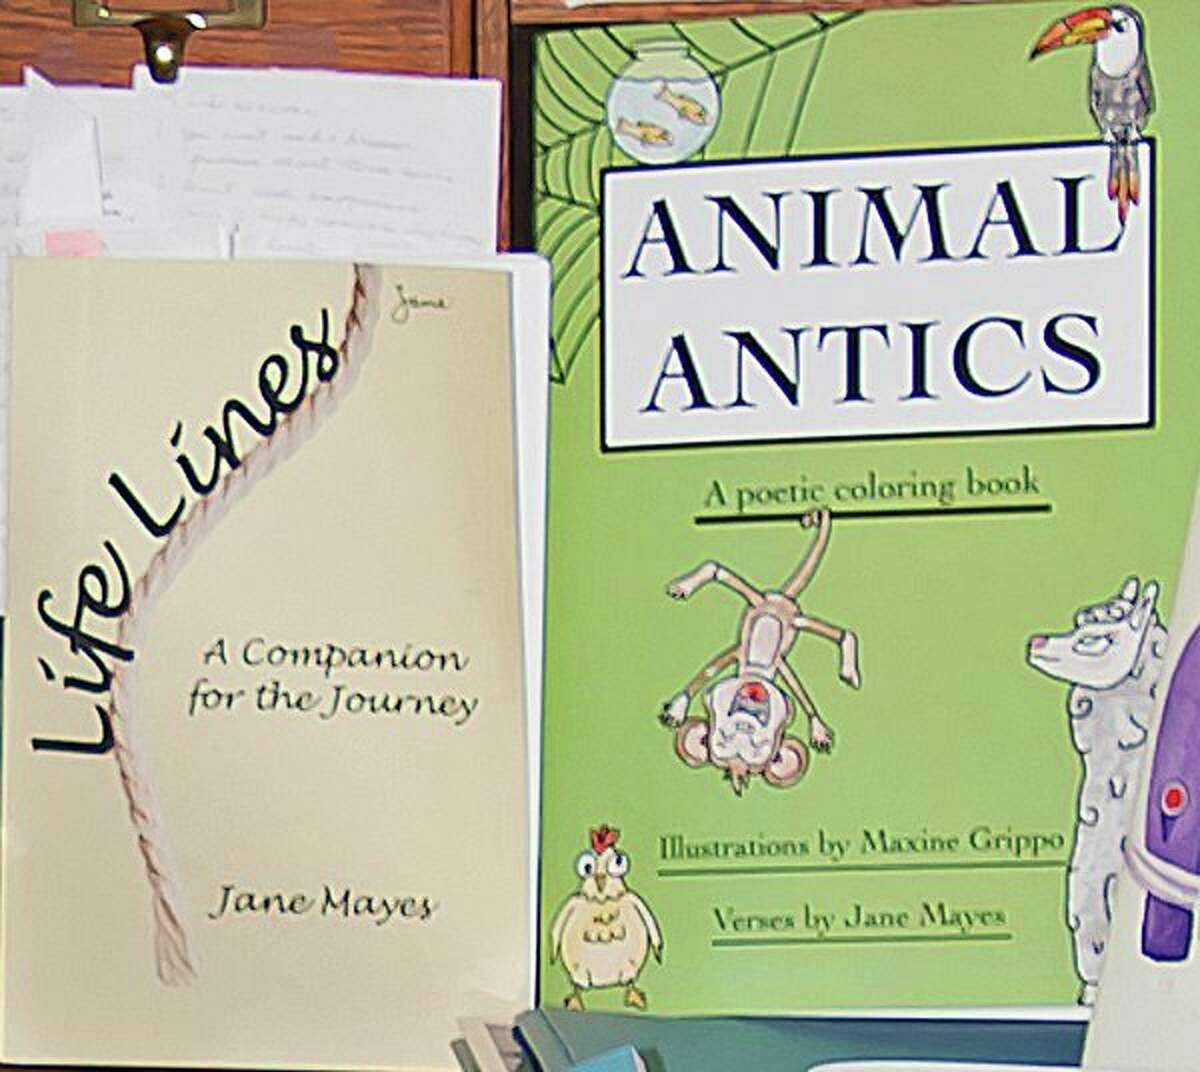 Jane Mayes of Port Austin recently authored these two books, "Life Lines, A Companion for the Journey," and "Animal Antics, a Poetic Coloring Book." (Bill Diller/For the Tribune)